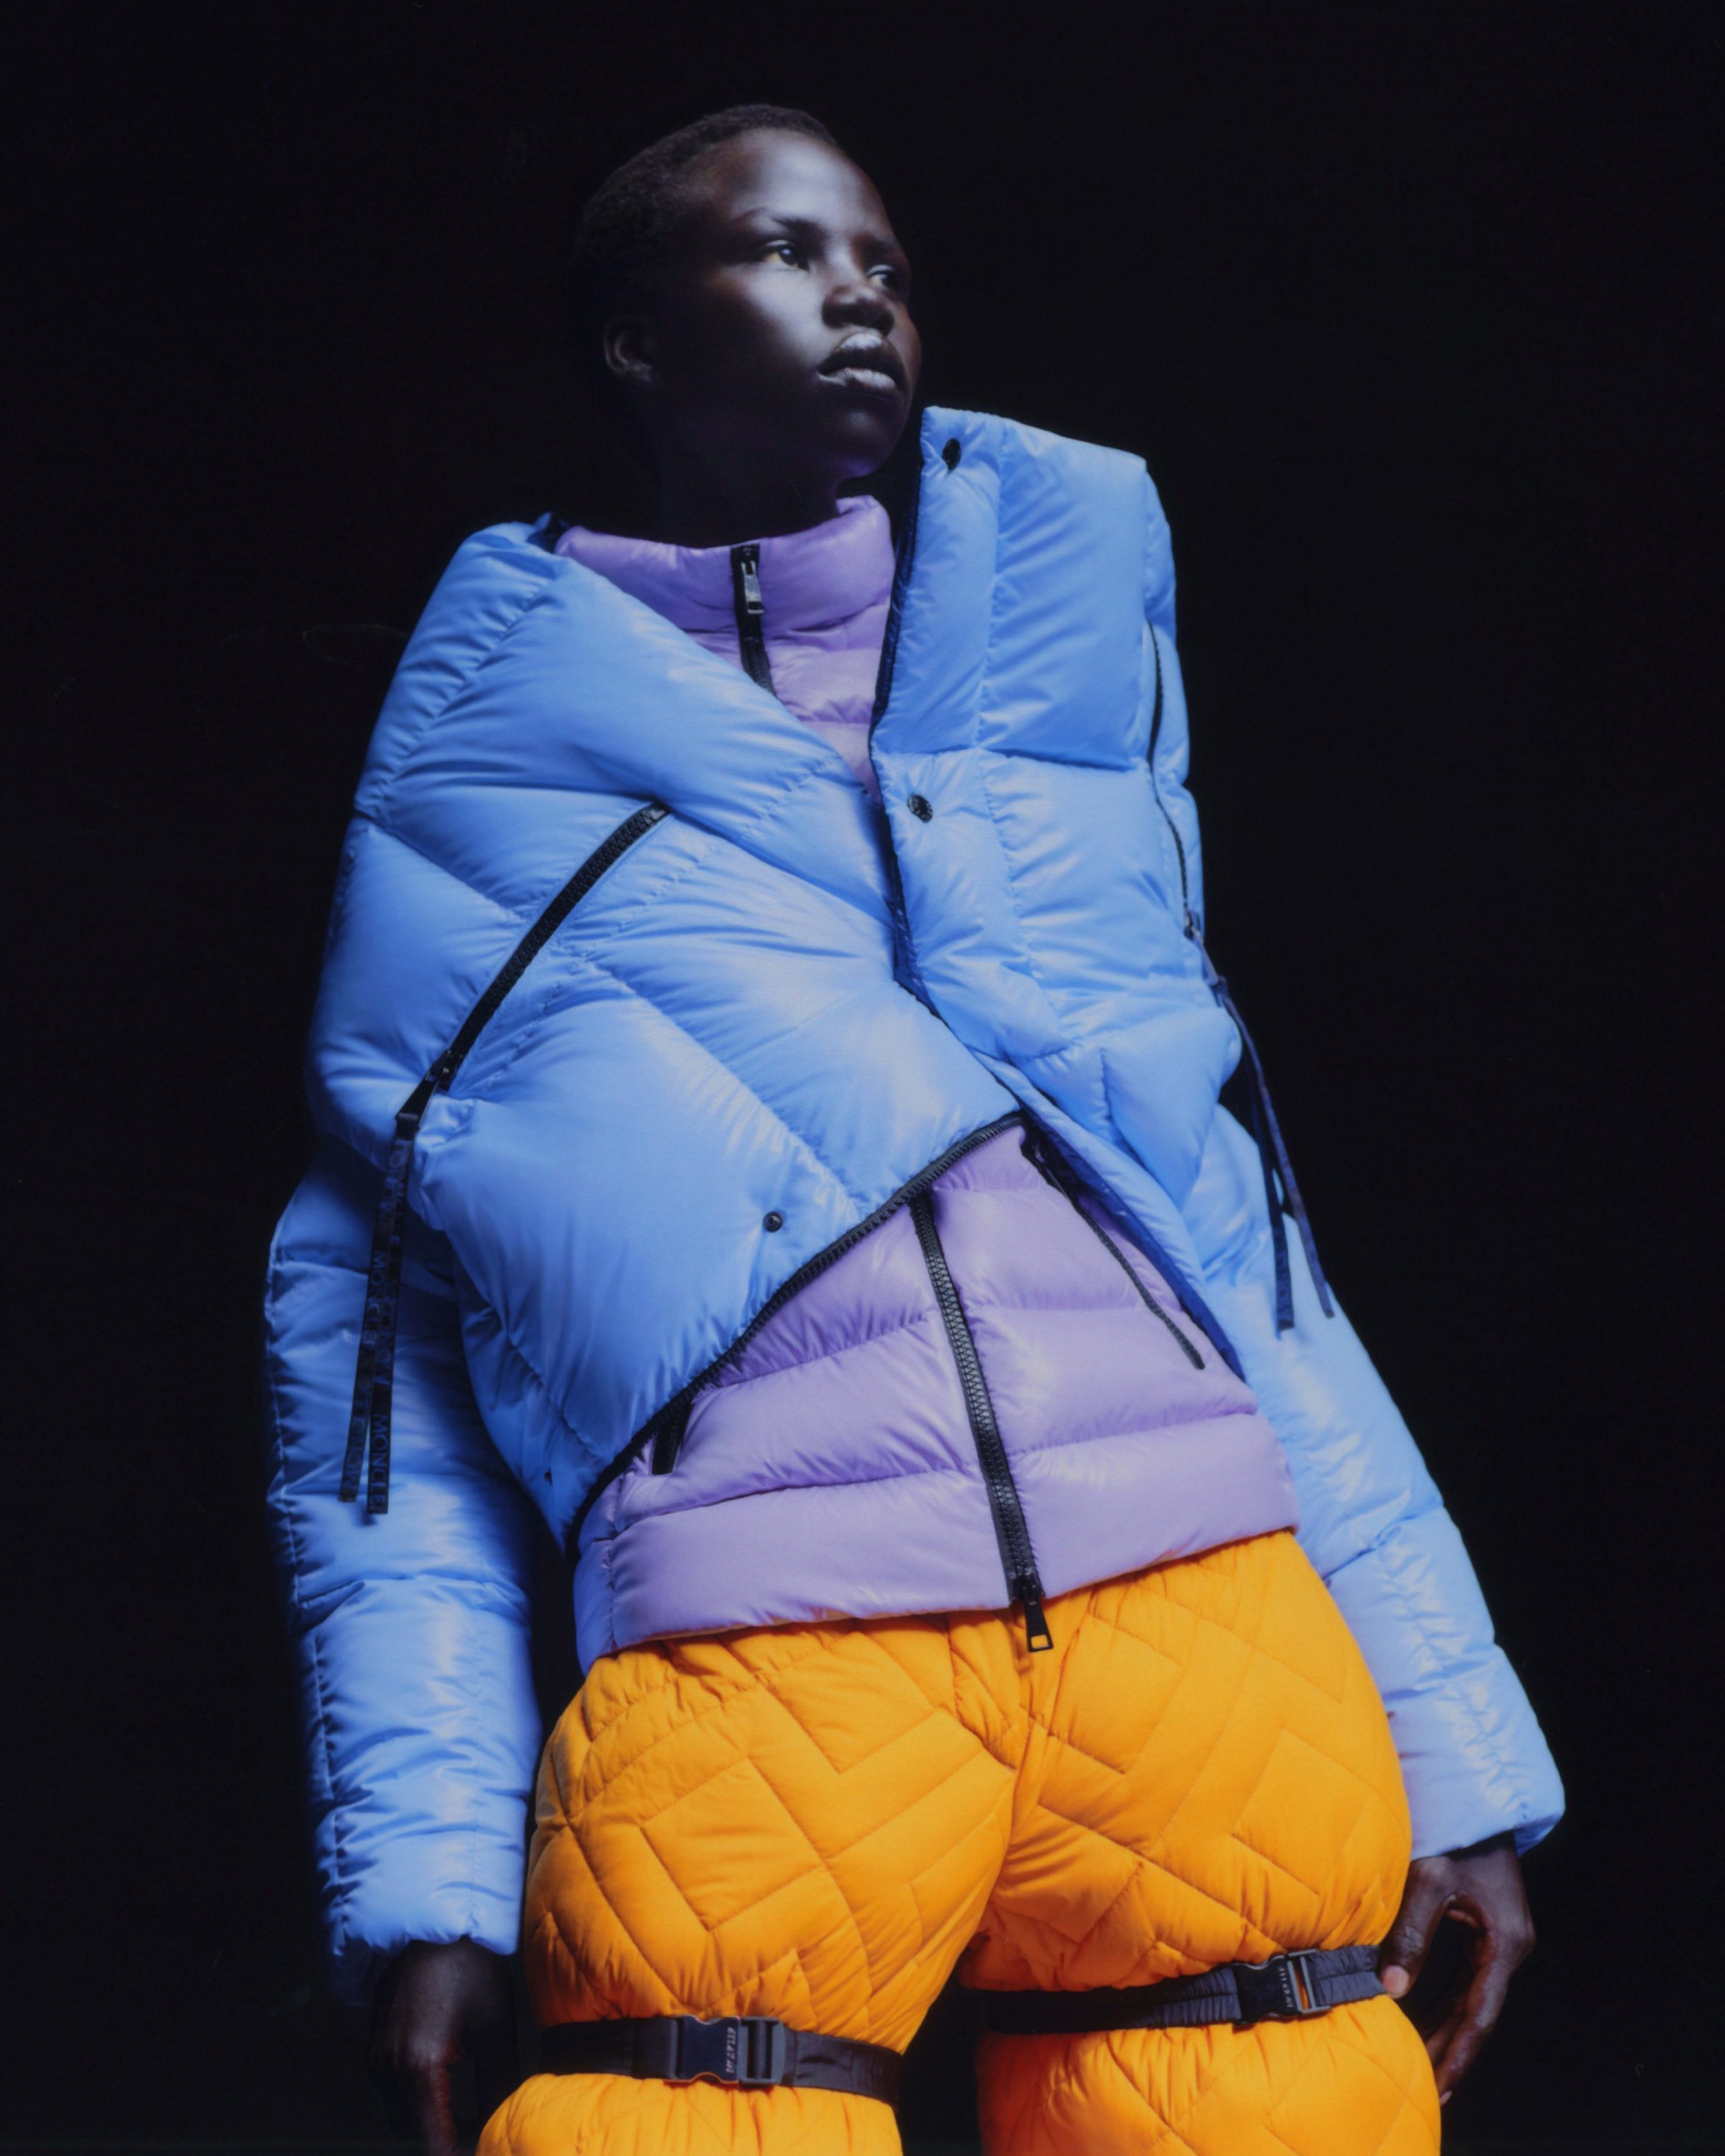 Moncler 'For The Love of Winter' 2023 Ad Campaign | The Impression